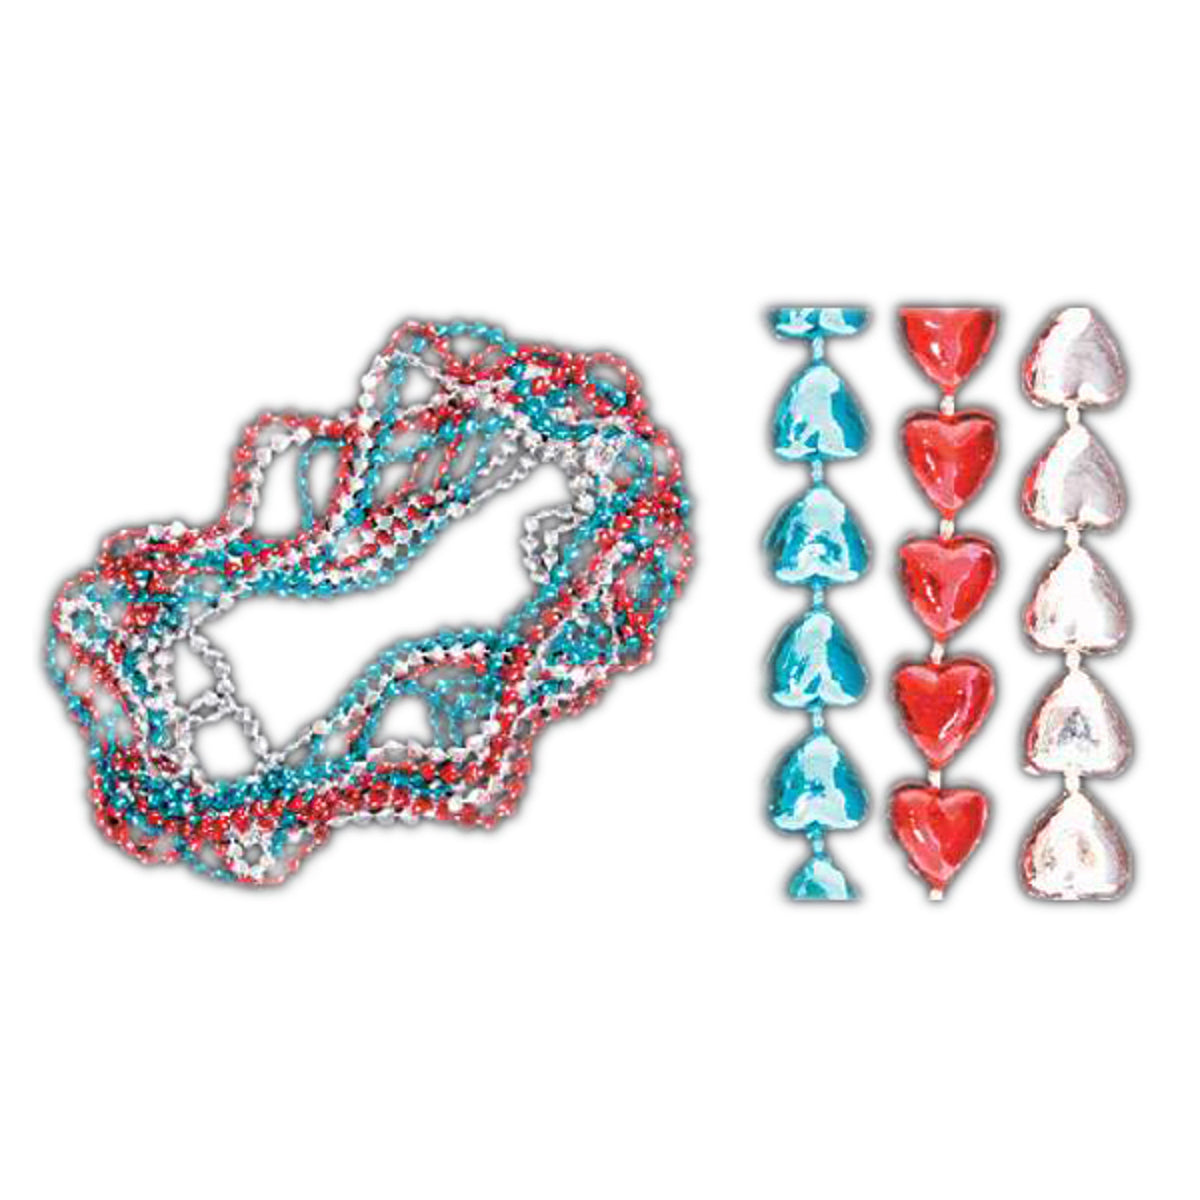 Sweet Heart Necklace Red White and Blue Pack of 12